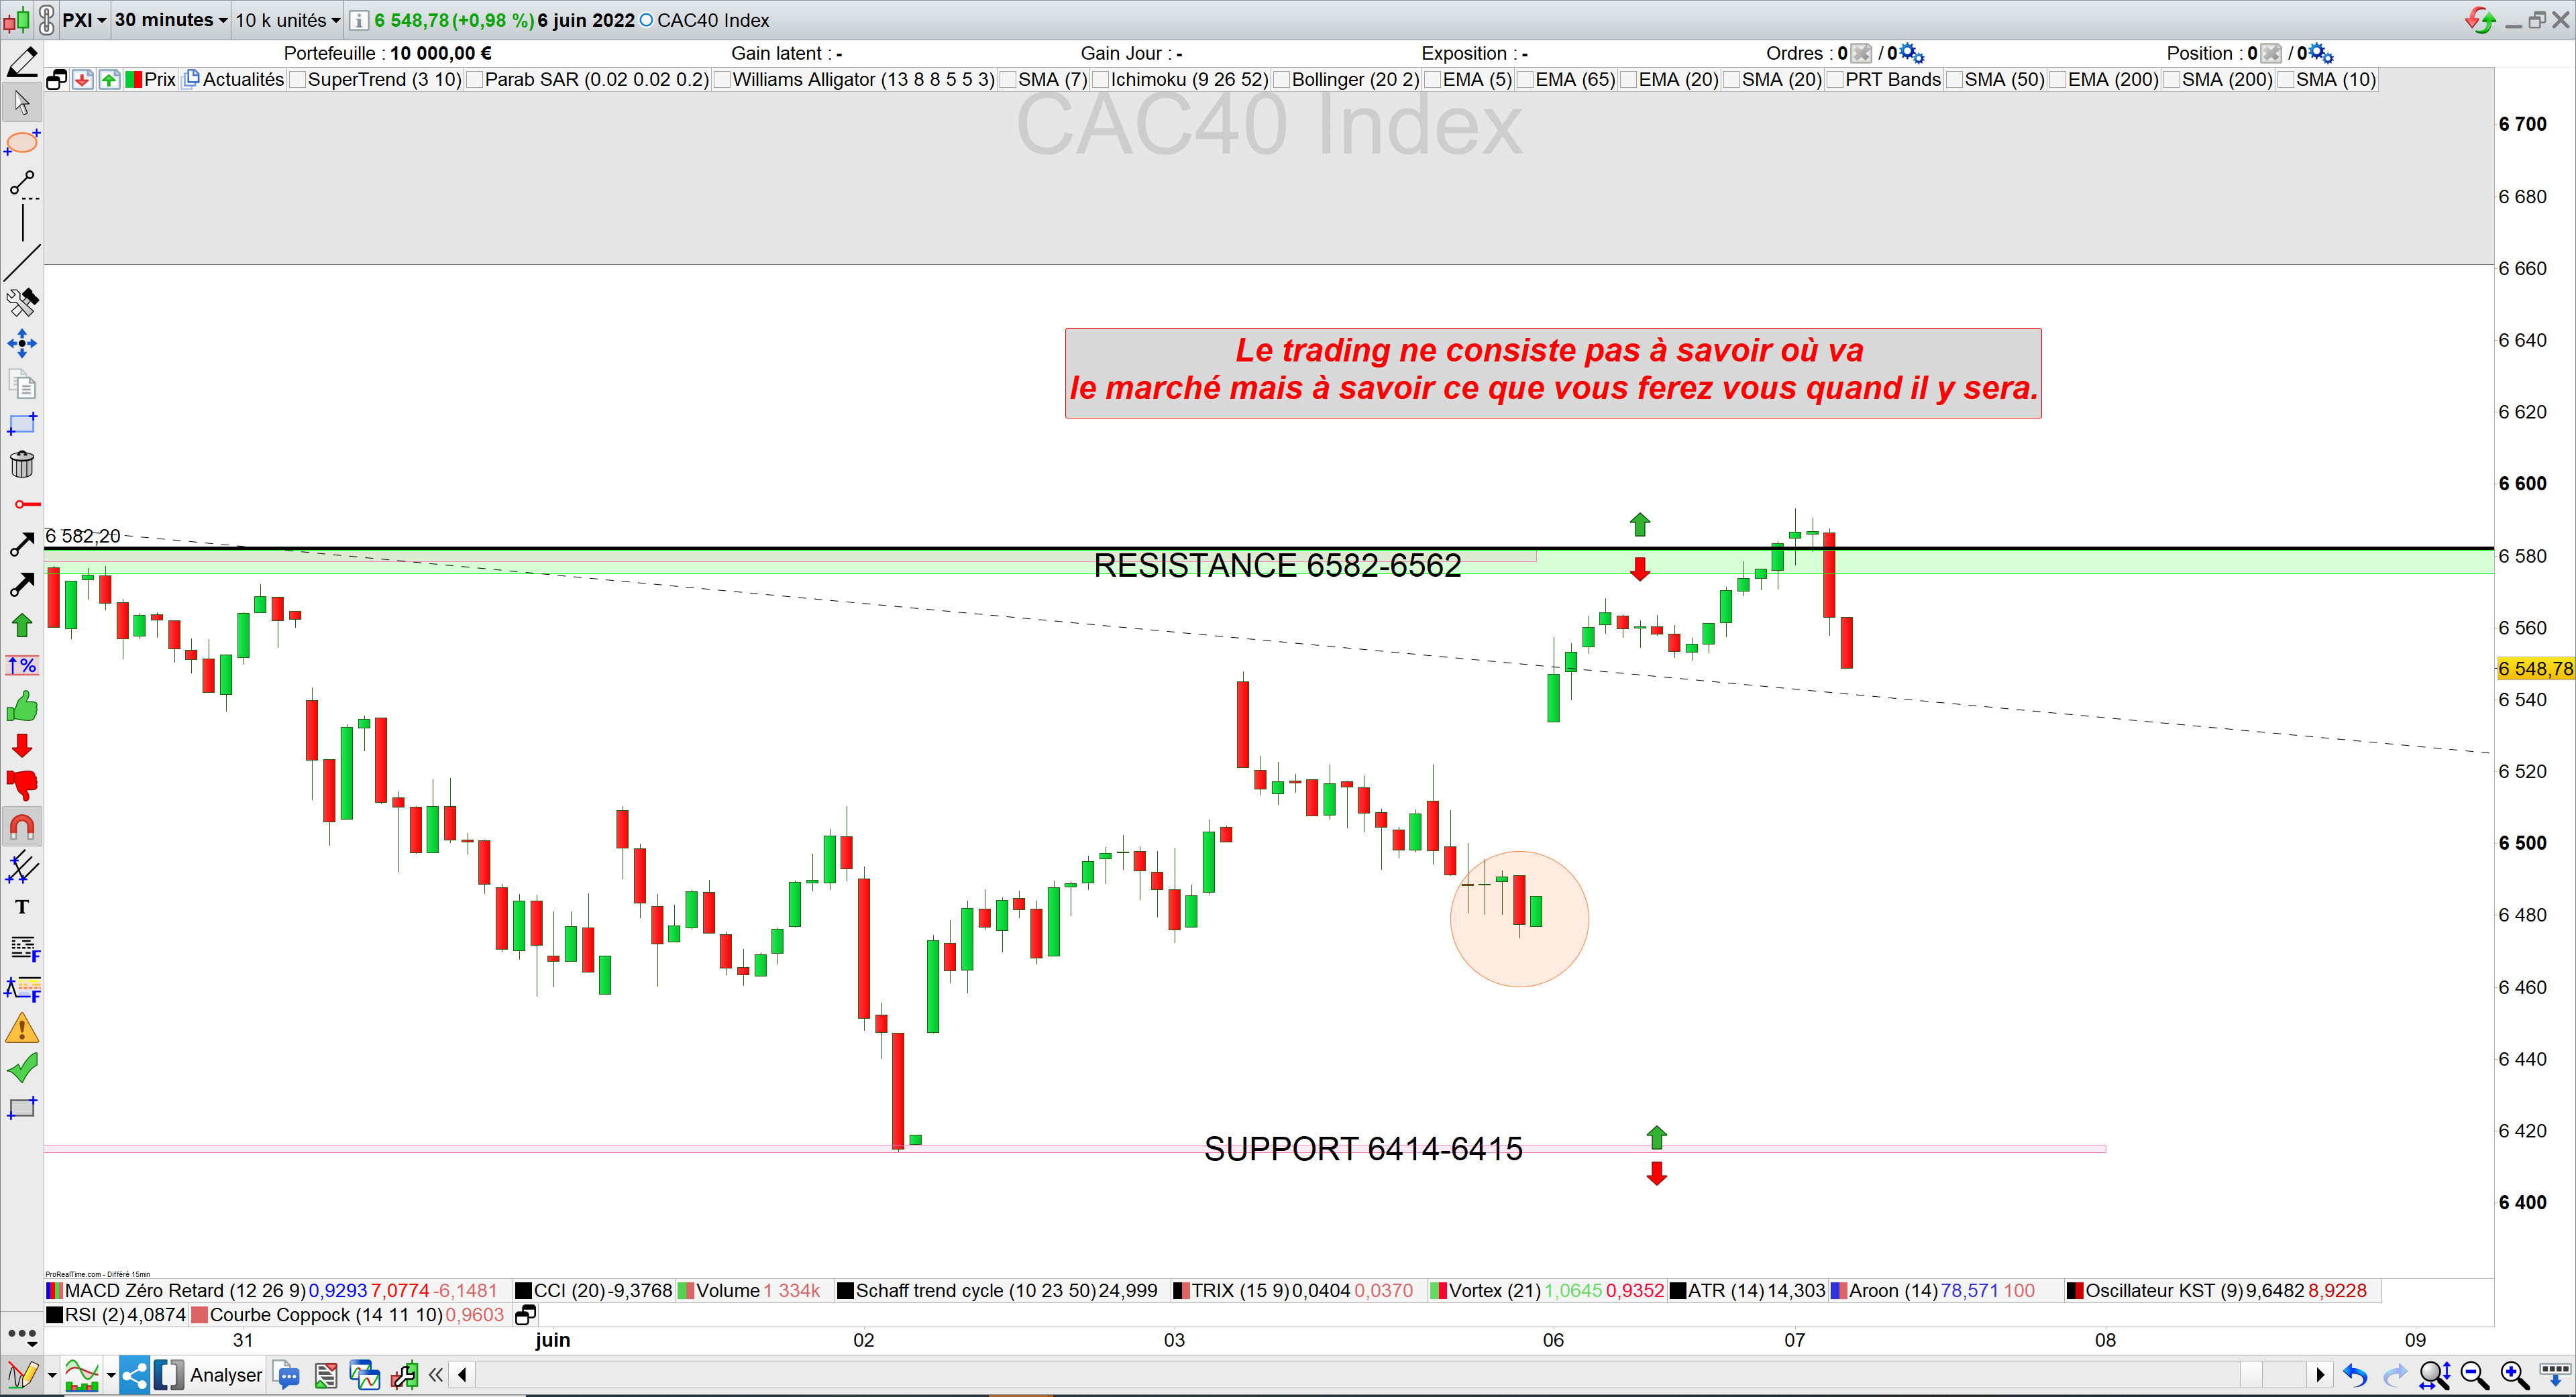 Trading cac40 06/06/22